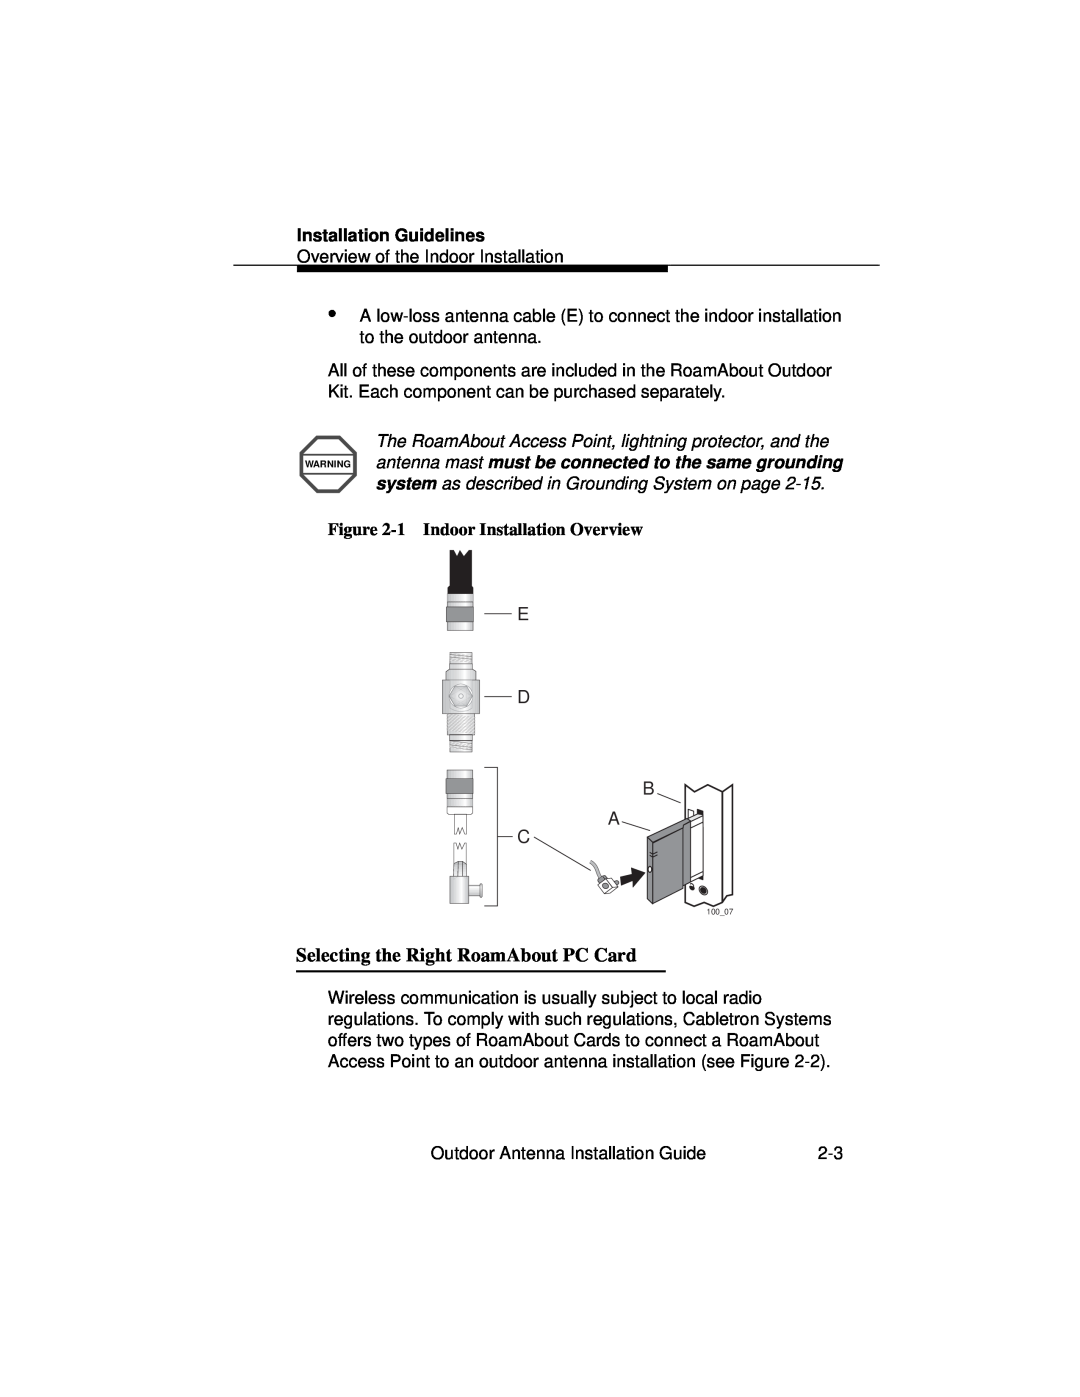 Cabletron Systems 9033073 manual Selecting the Right RoamAbout PC Card, E D B A C, Installation Guidelines 